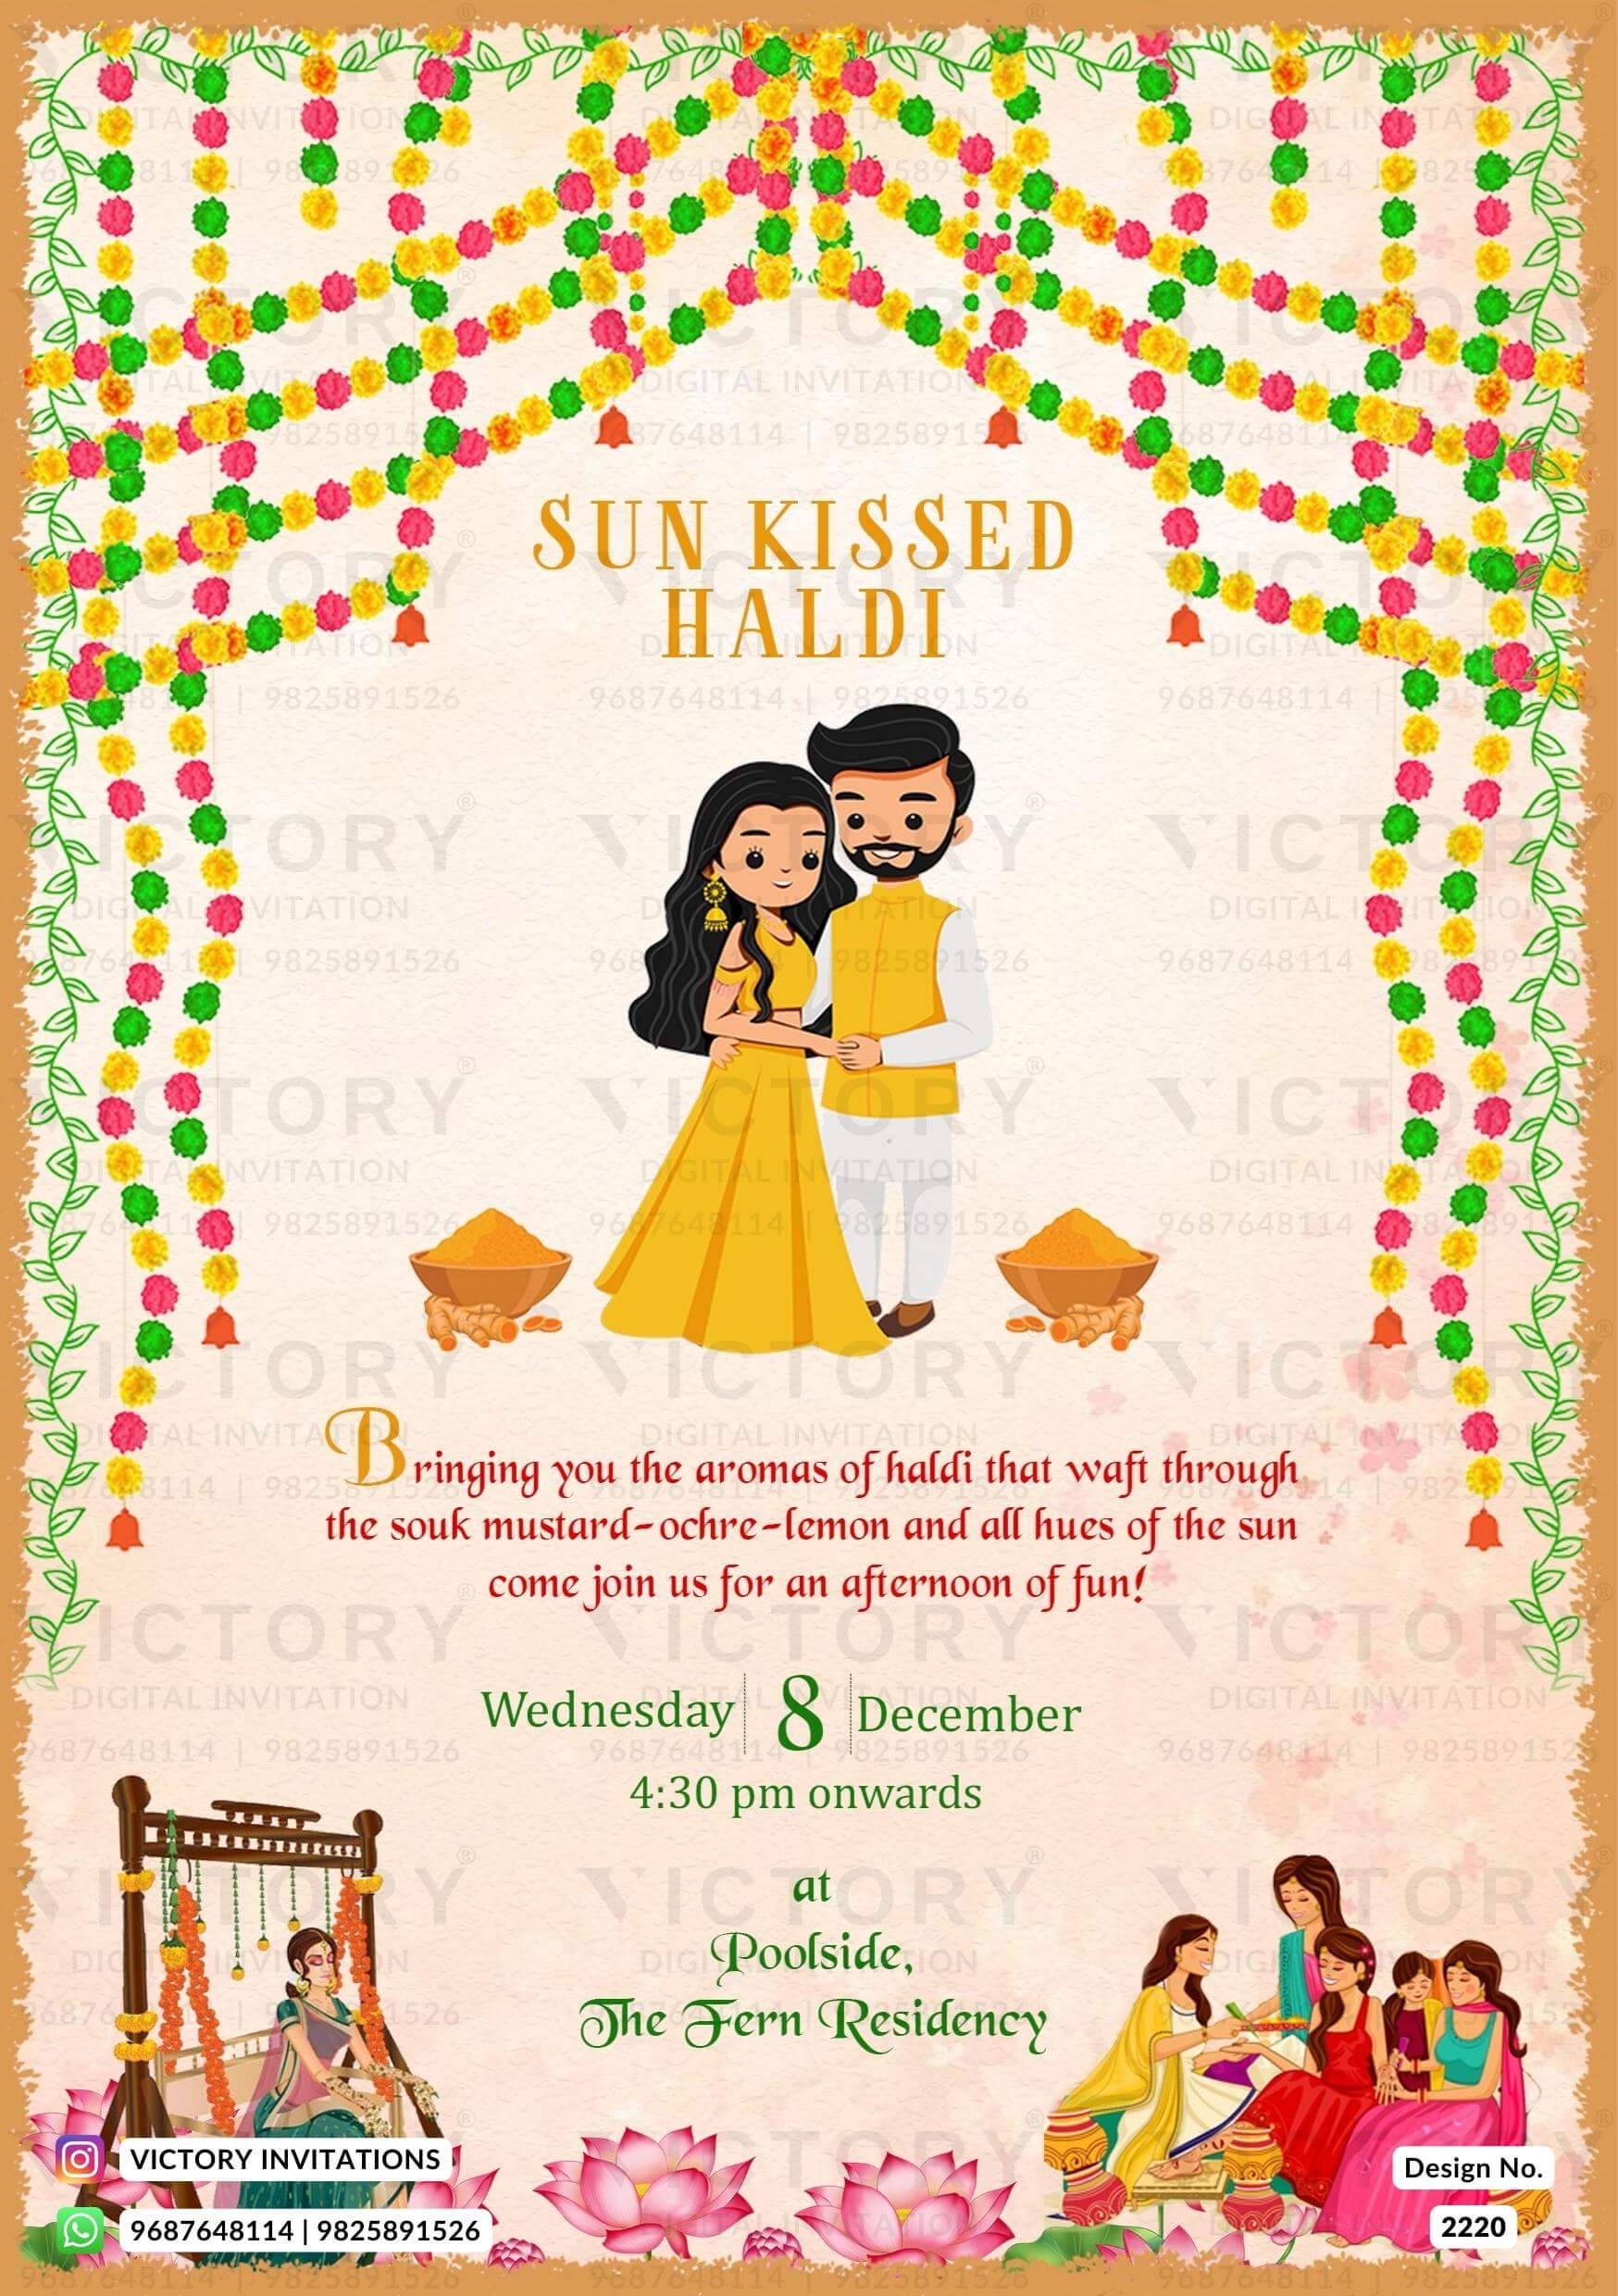 A Breathtaking Haldi Celebration Set on a Backdrop of white colour, Adorned with an Intricate Frame, Enchanting Couple and Girl Doodles, and Resplendent Garland, Design no.2220